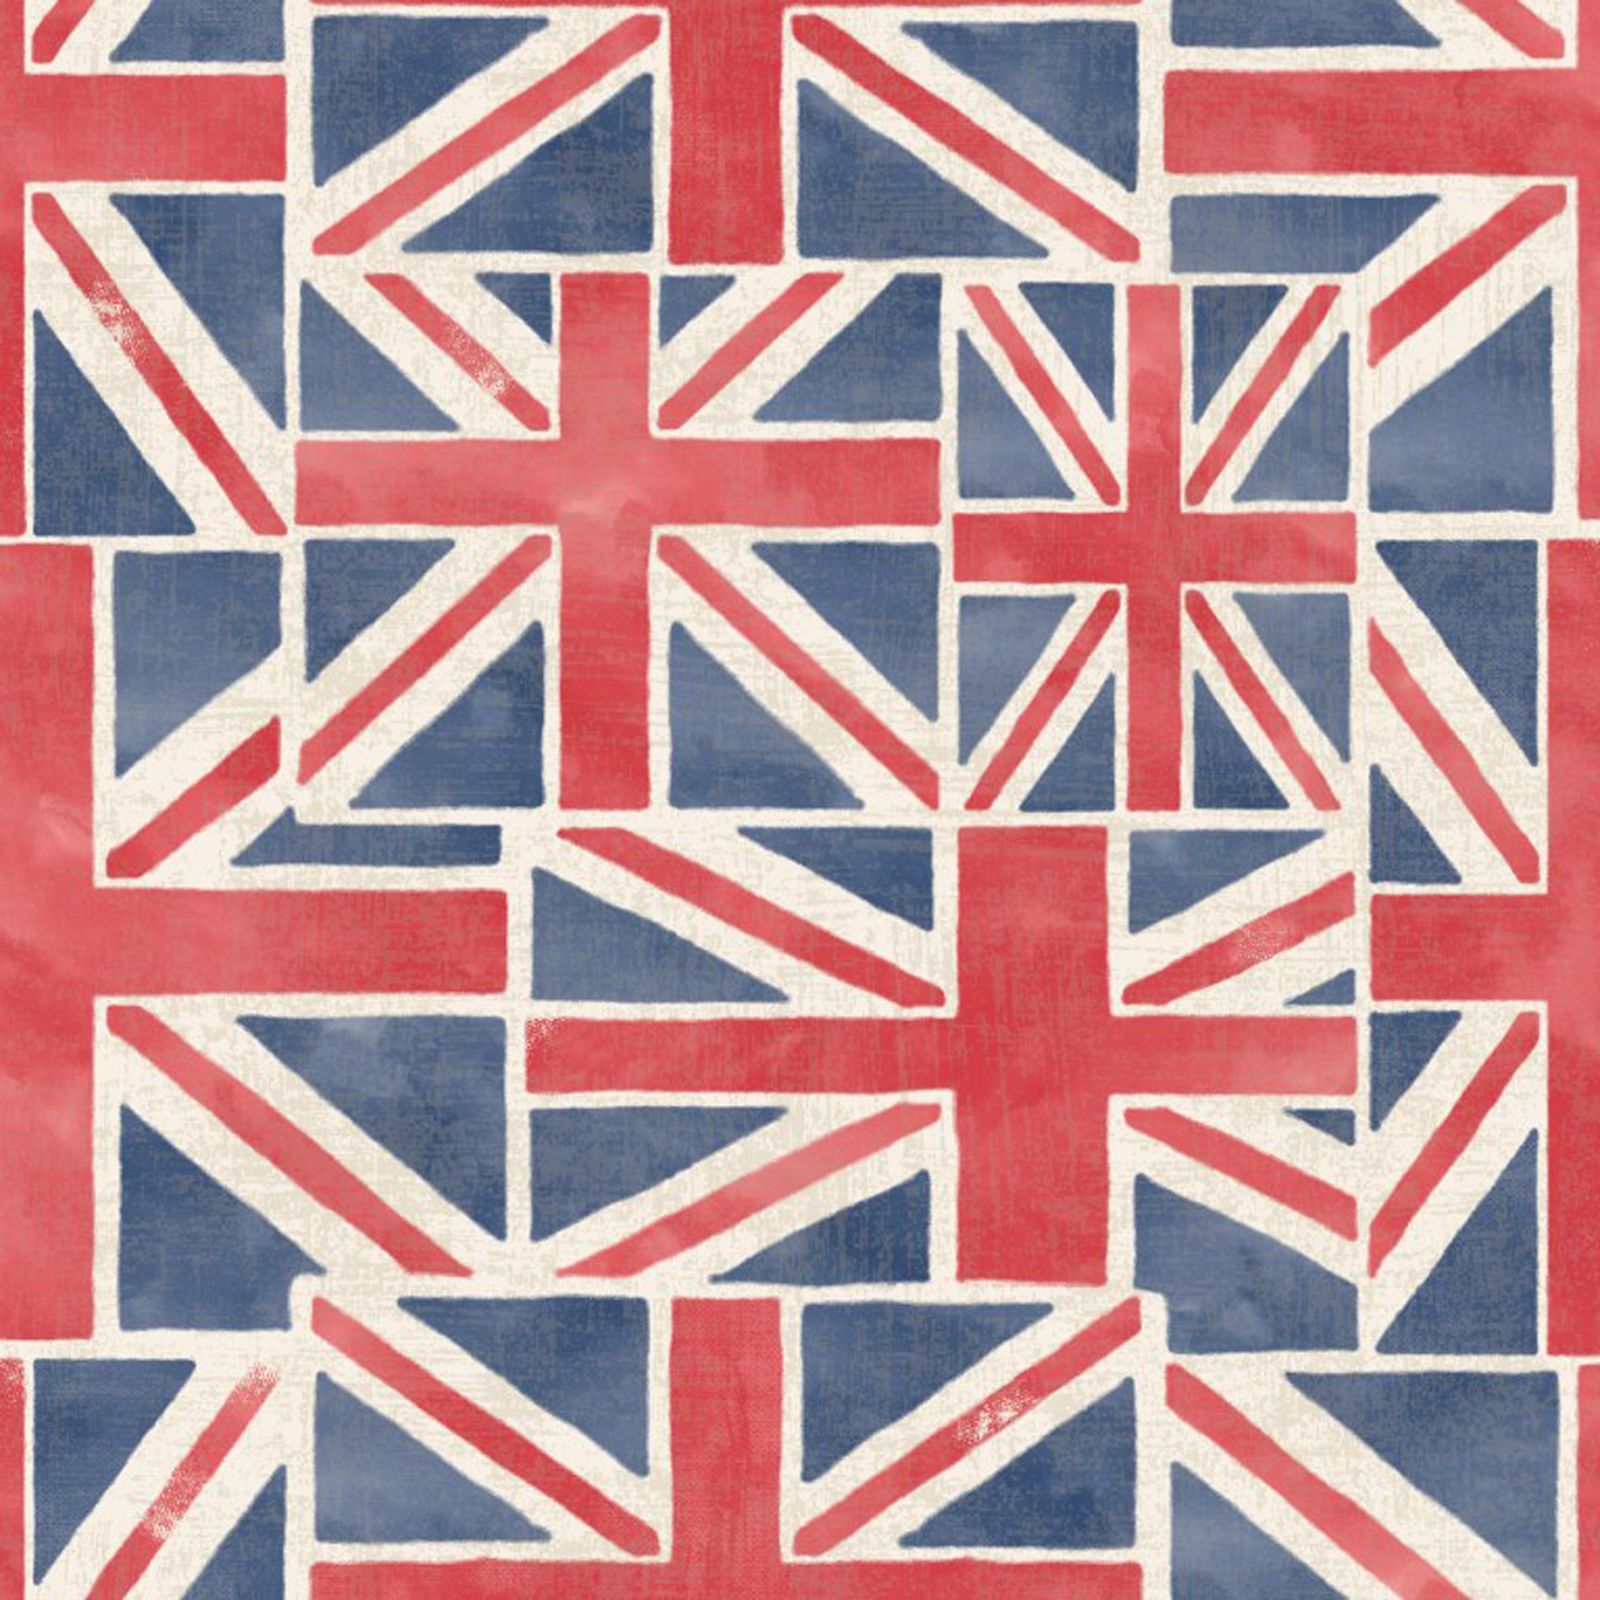 Details About Union Jack Wallpaper 10m New Feature Wall British Flag